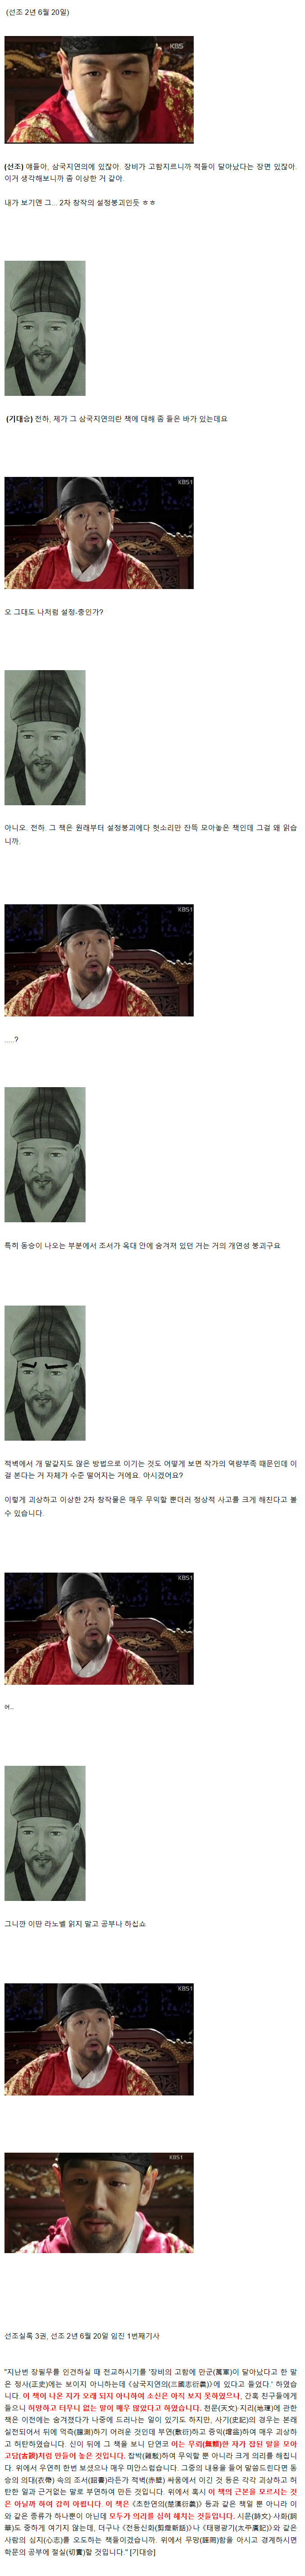 King of Joseon, who talked about Lanobel at a government meeting.